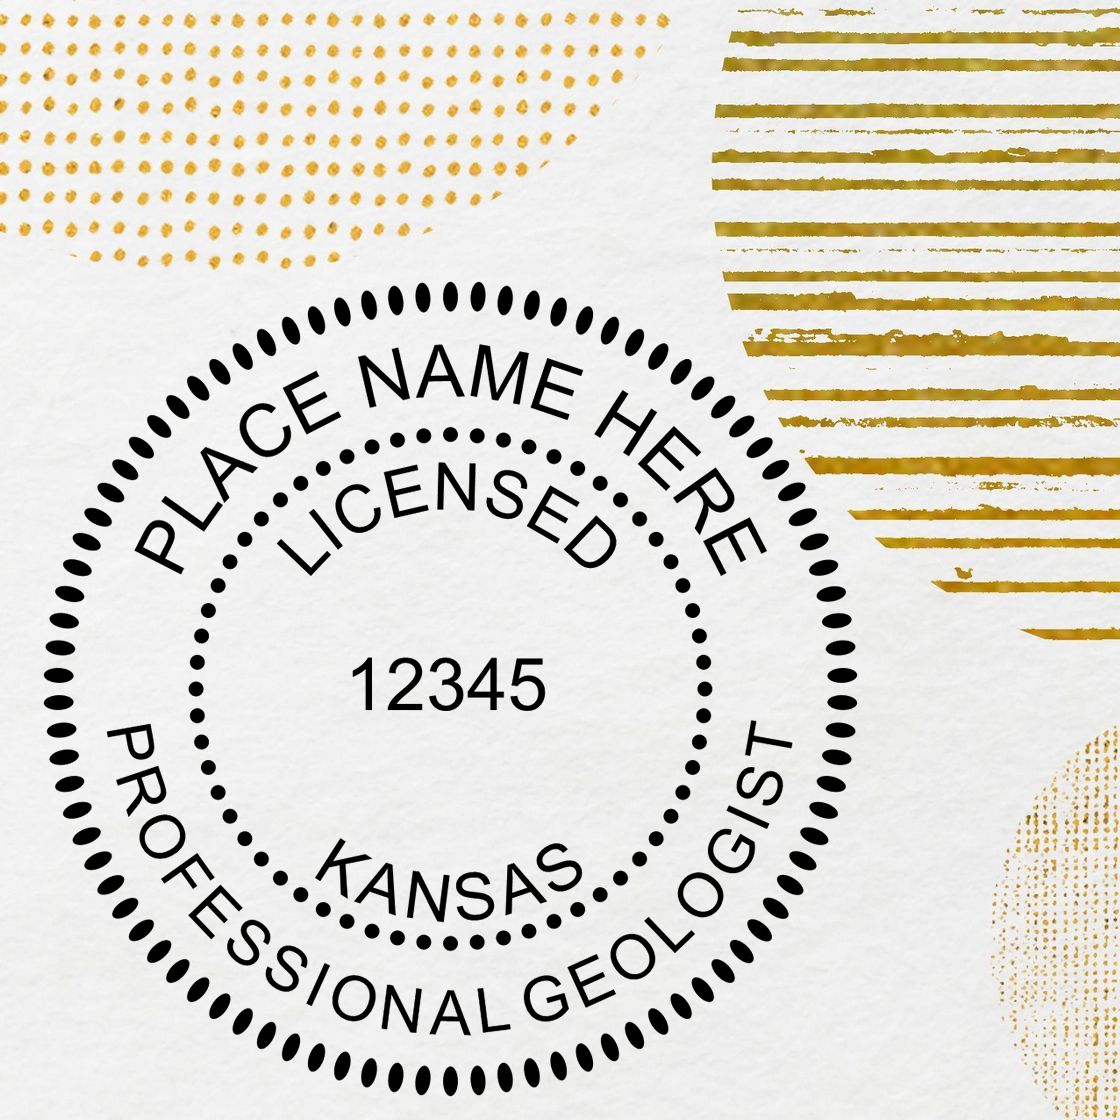 The Kansas Professional Geologist Seal Stamp stamp impression comes to life with a crisp, detailed image stamped on paper - showcasing true professional quality.